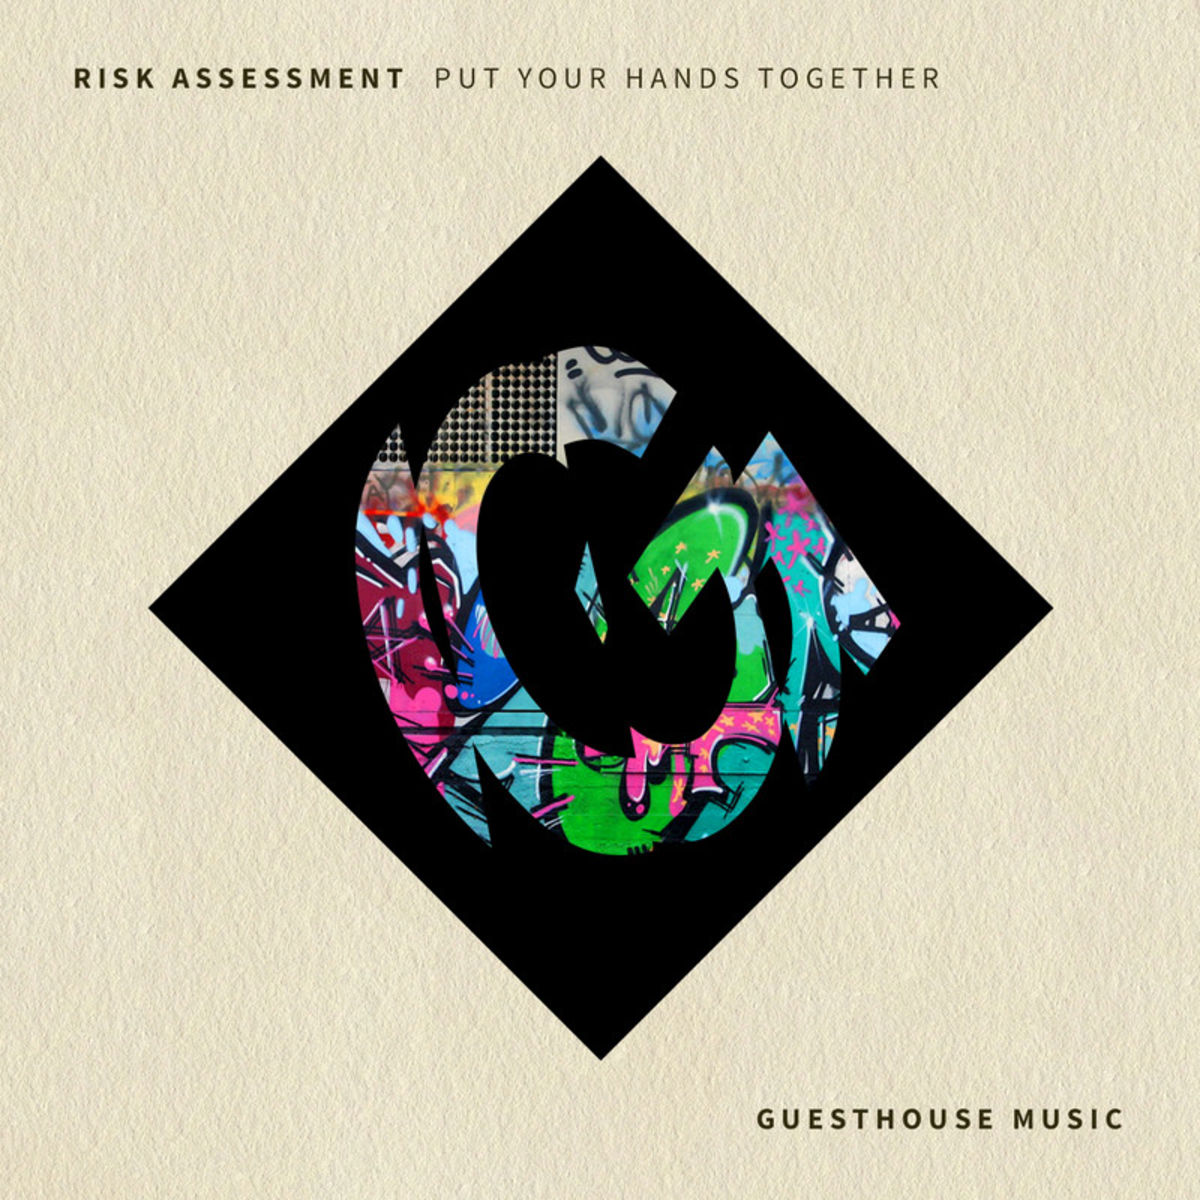 Risk Assessment - Put Your Hands Together / Guesthouse Music